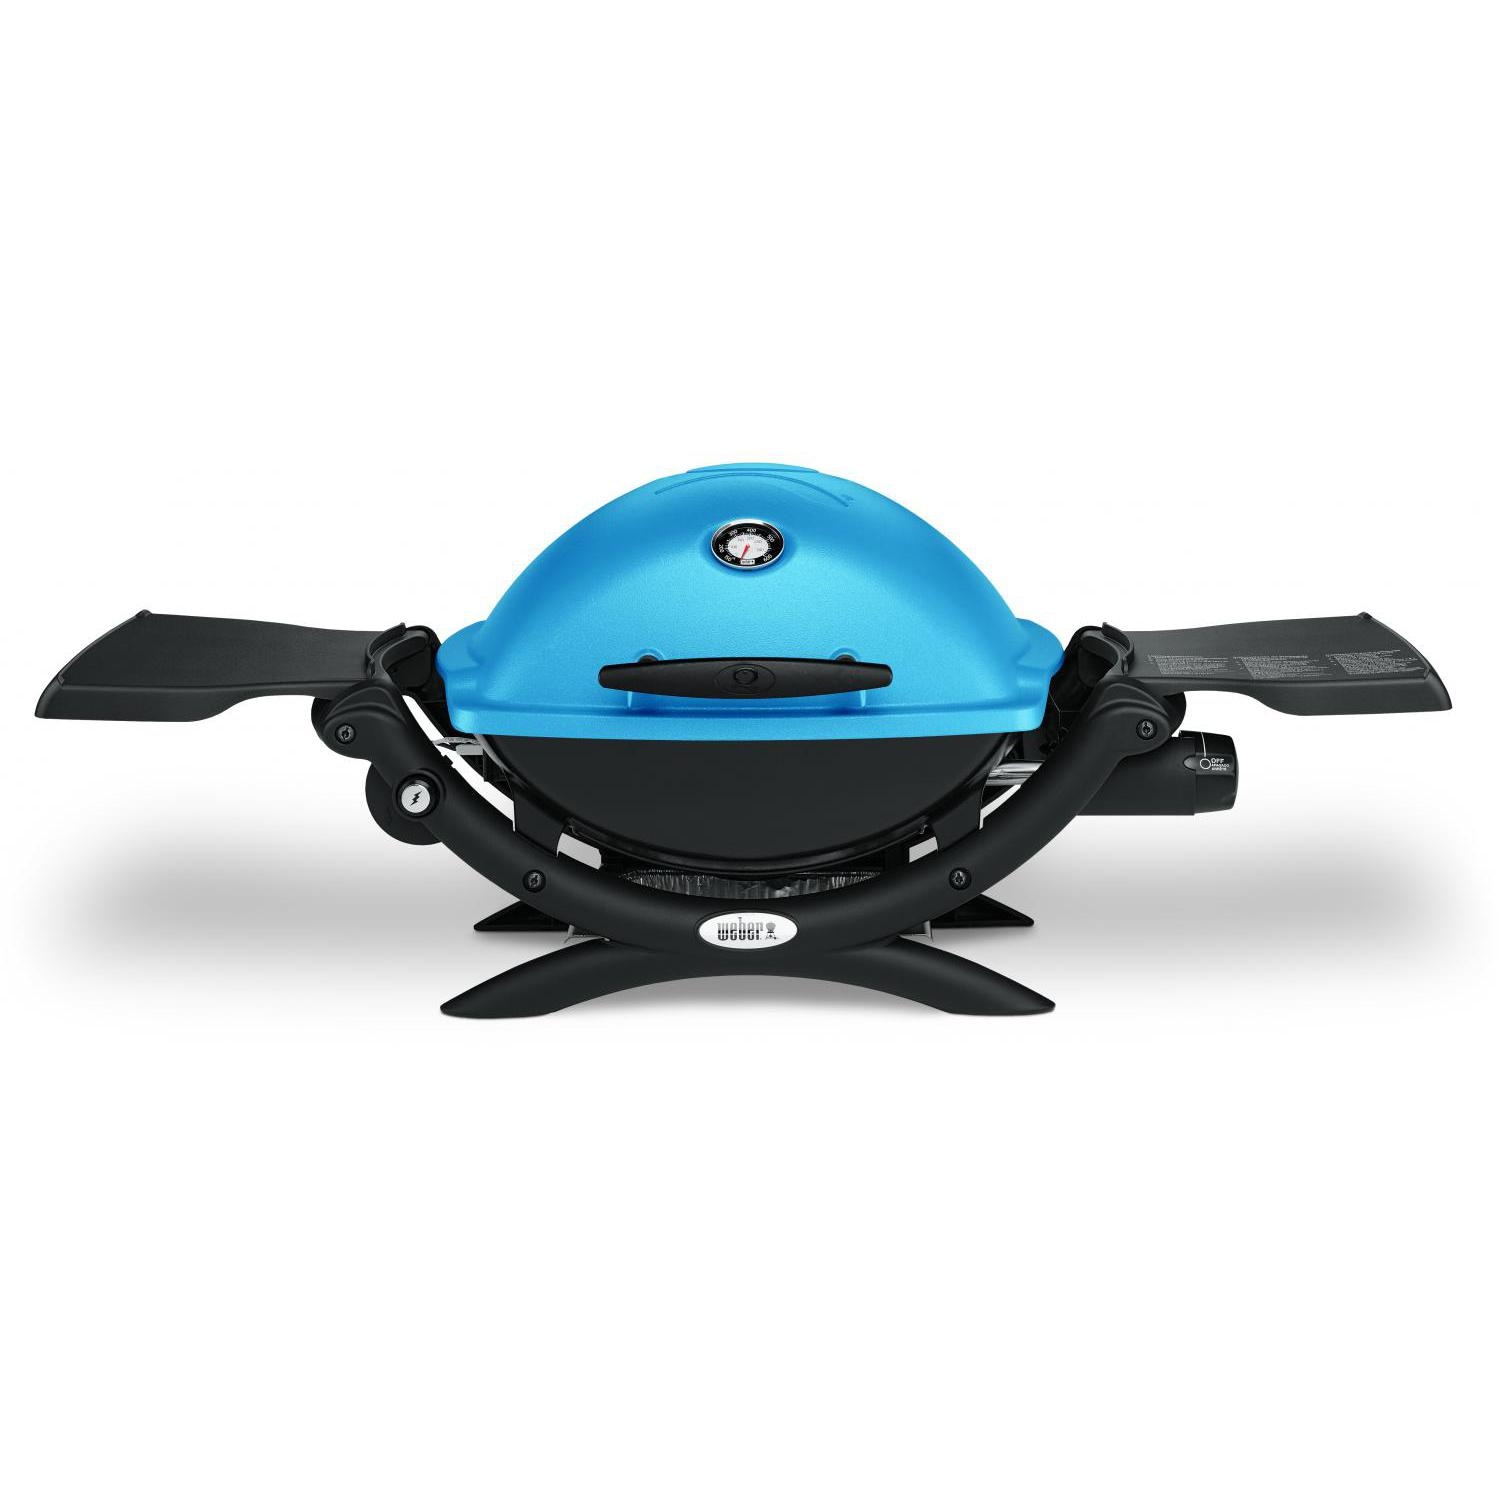 GRILL PORTABLE GAS Q 1200 BLUE - image 1 of 6